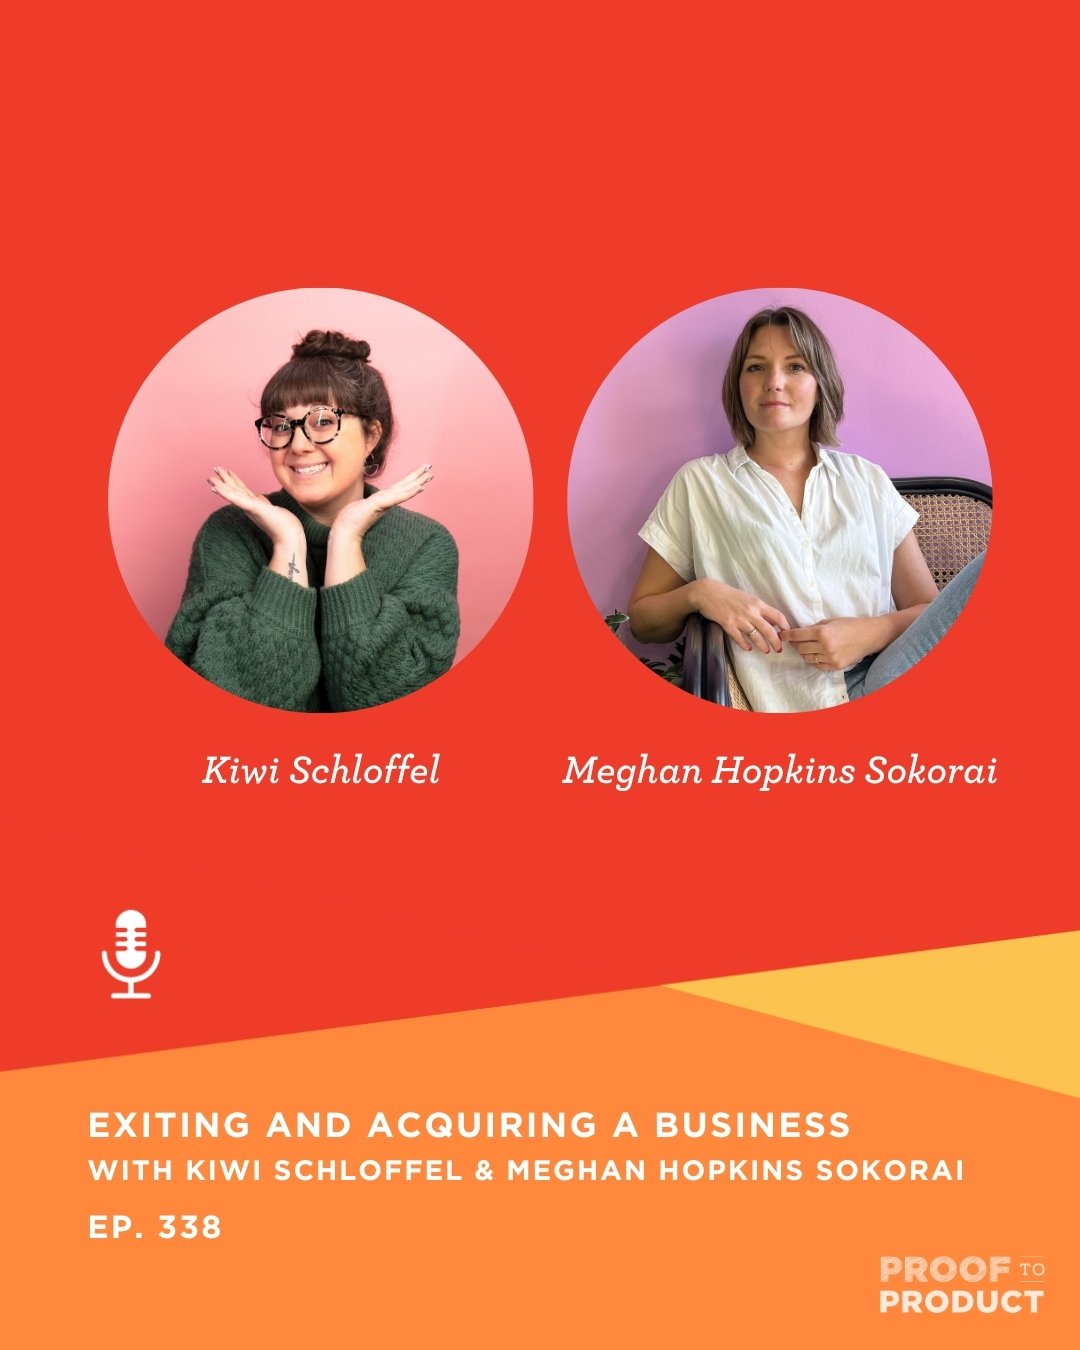 Friends, if you have ever considered exiting your business OR acquiring another person&rsquo;s business today&rsquo;s episode is for you.

My guests today are two of my clients &amp; friends, Meghan Hopkins Sokorai of @and_hereweare and Kiwi Schloffe